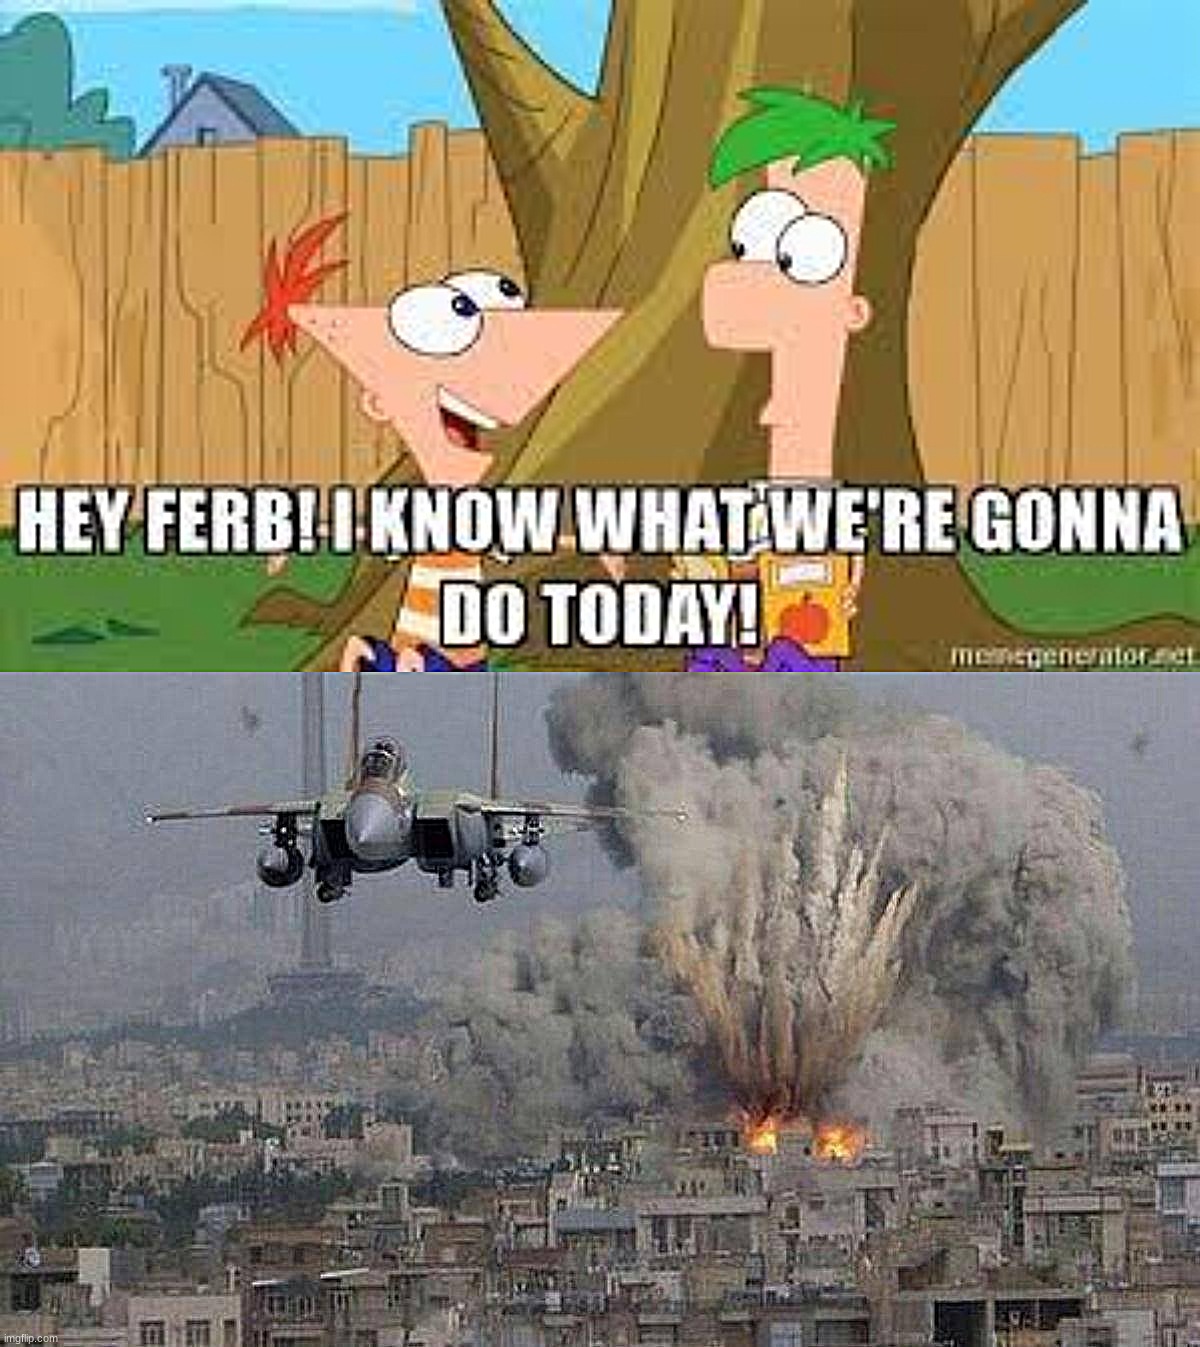 "Aren't you boys a little young to be commiting mass genocide?" | image tagged in hey ferb i know what we're gonna do today,phineas and ferb,uh oh,israel,tv,bombs | made w/ Imgflip meme maker